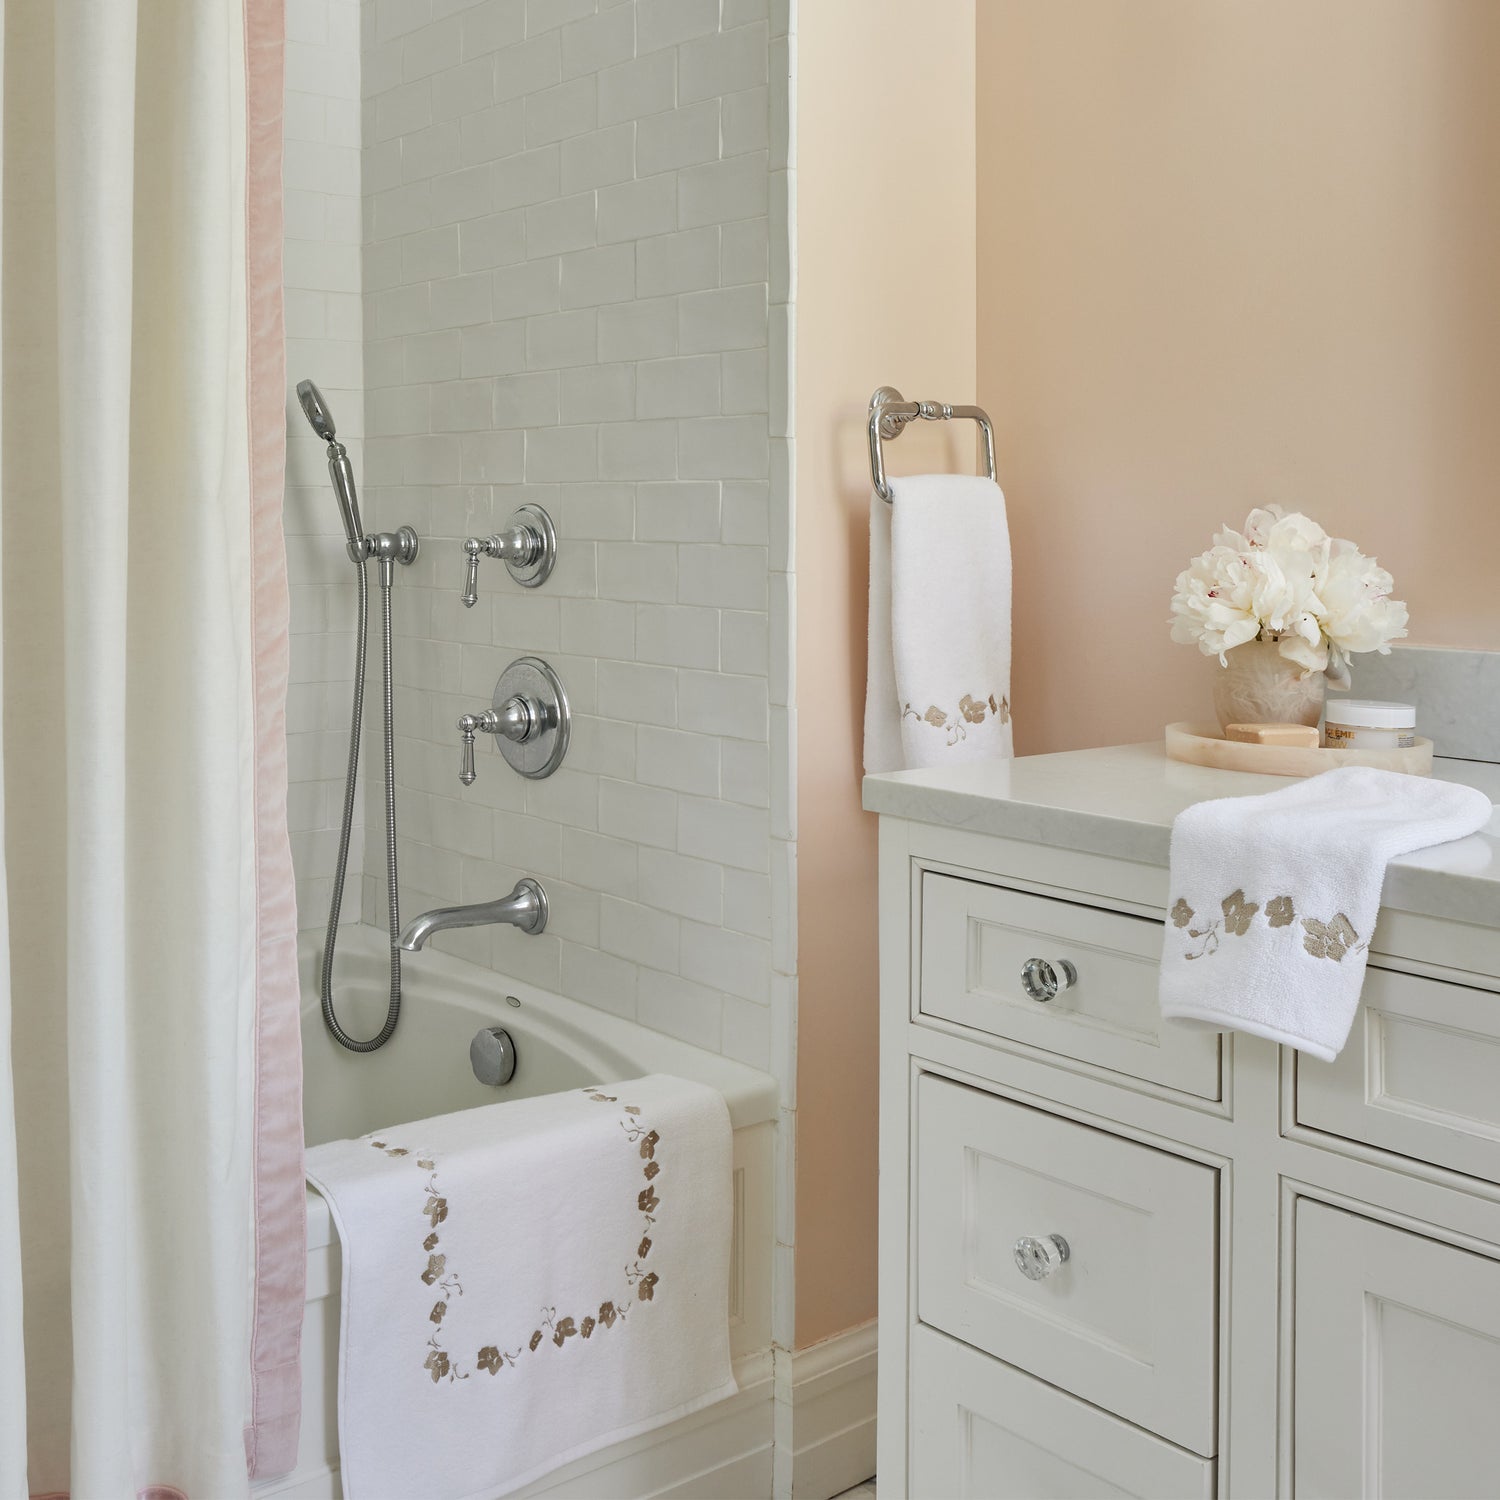 white towel and bath mat with light brown embroidered floral trim in a pink bathroom with a white shower curtain hung with a light pink velvet band and white tiles in the tub